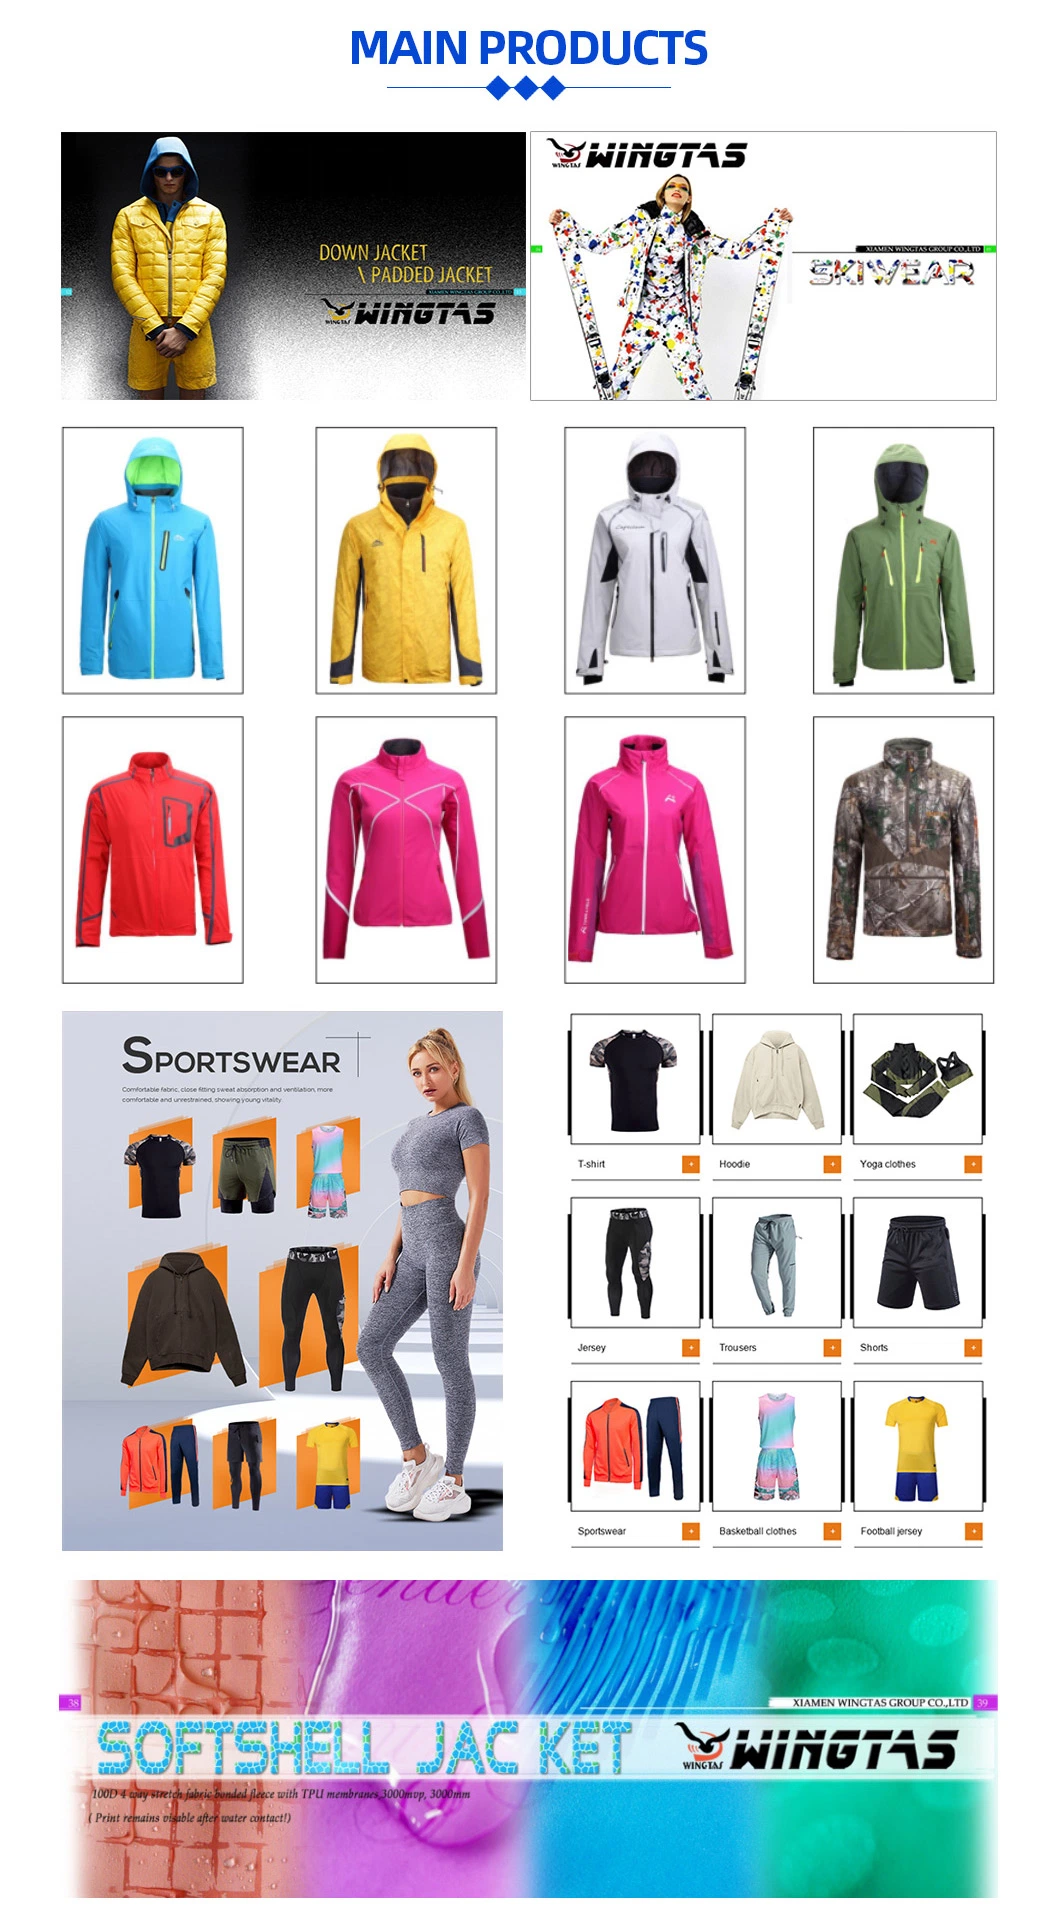 China Supplier New Men Outerwear Fashion Puffer Hoodies Coat Down Jacket